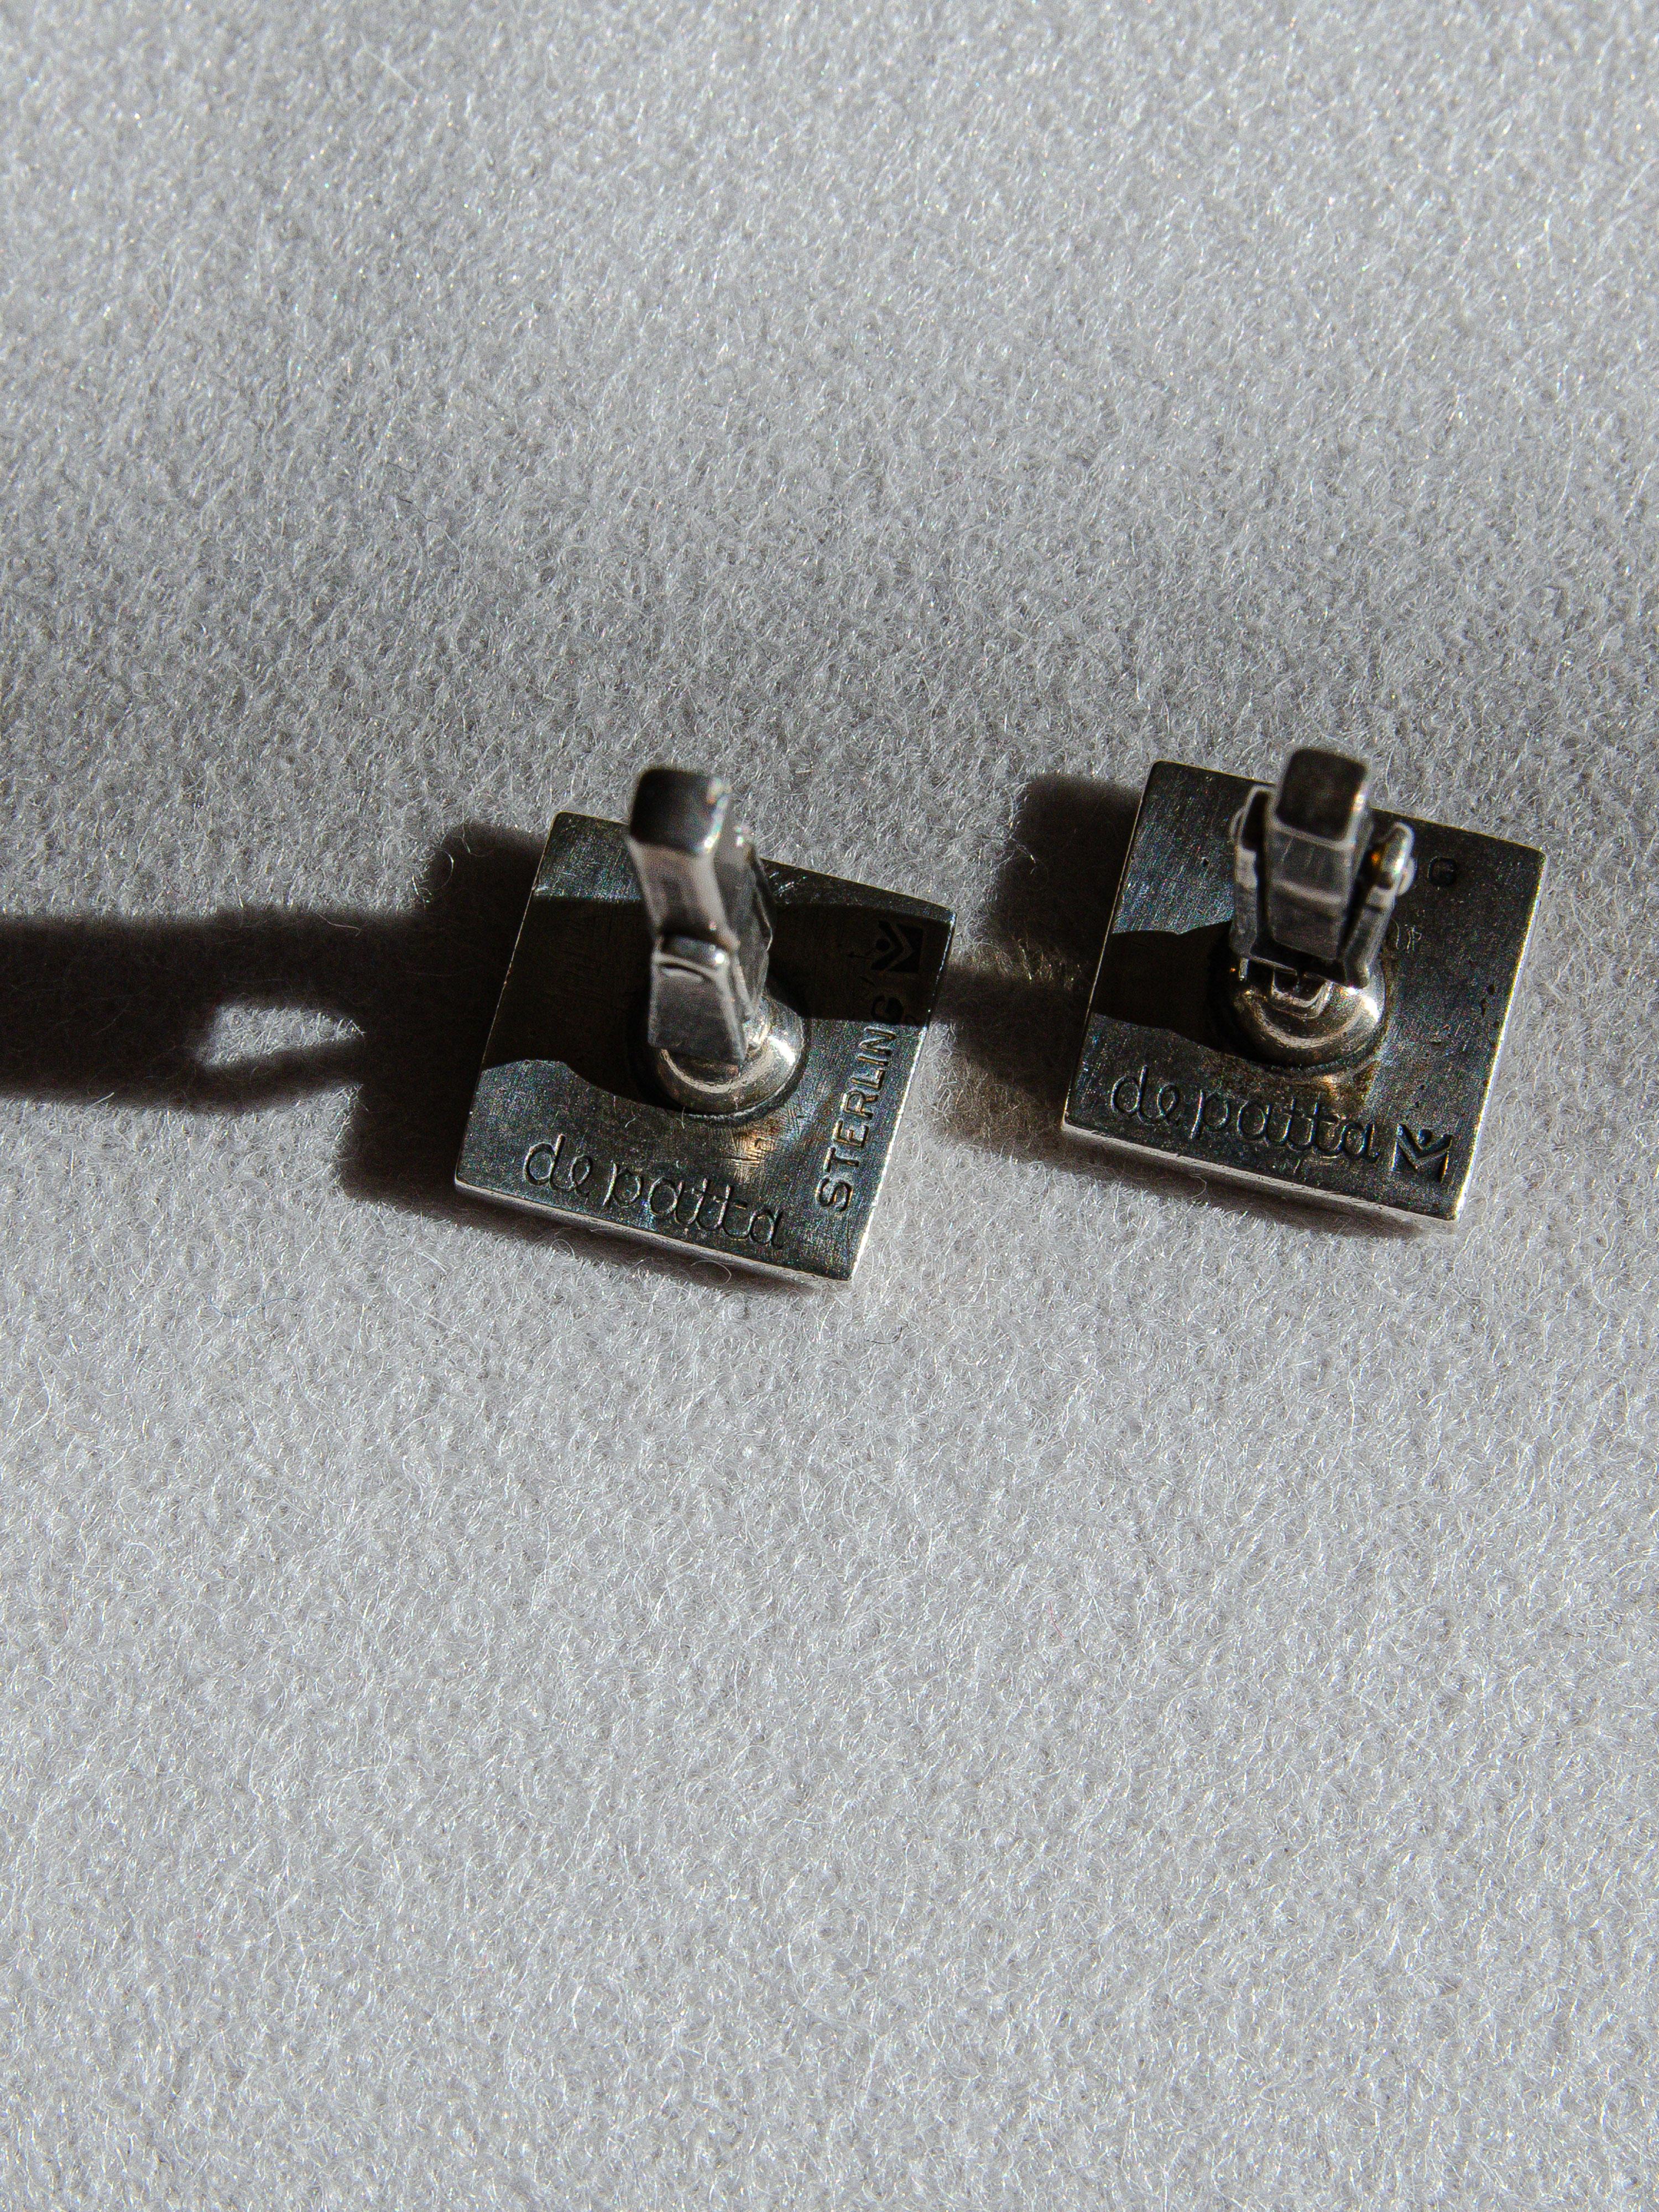 Rare vintage pair of sterling silver cufflinks designed by Margaret De Patta In Good Condition For Sale In Brooklyn, US